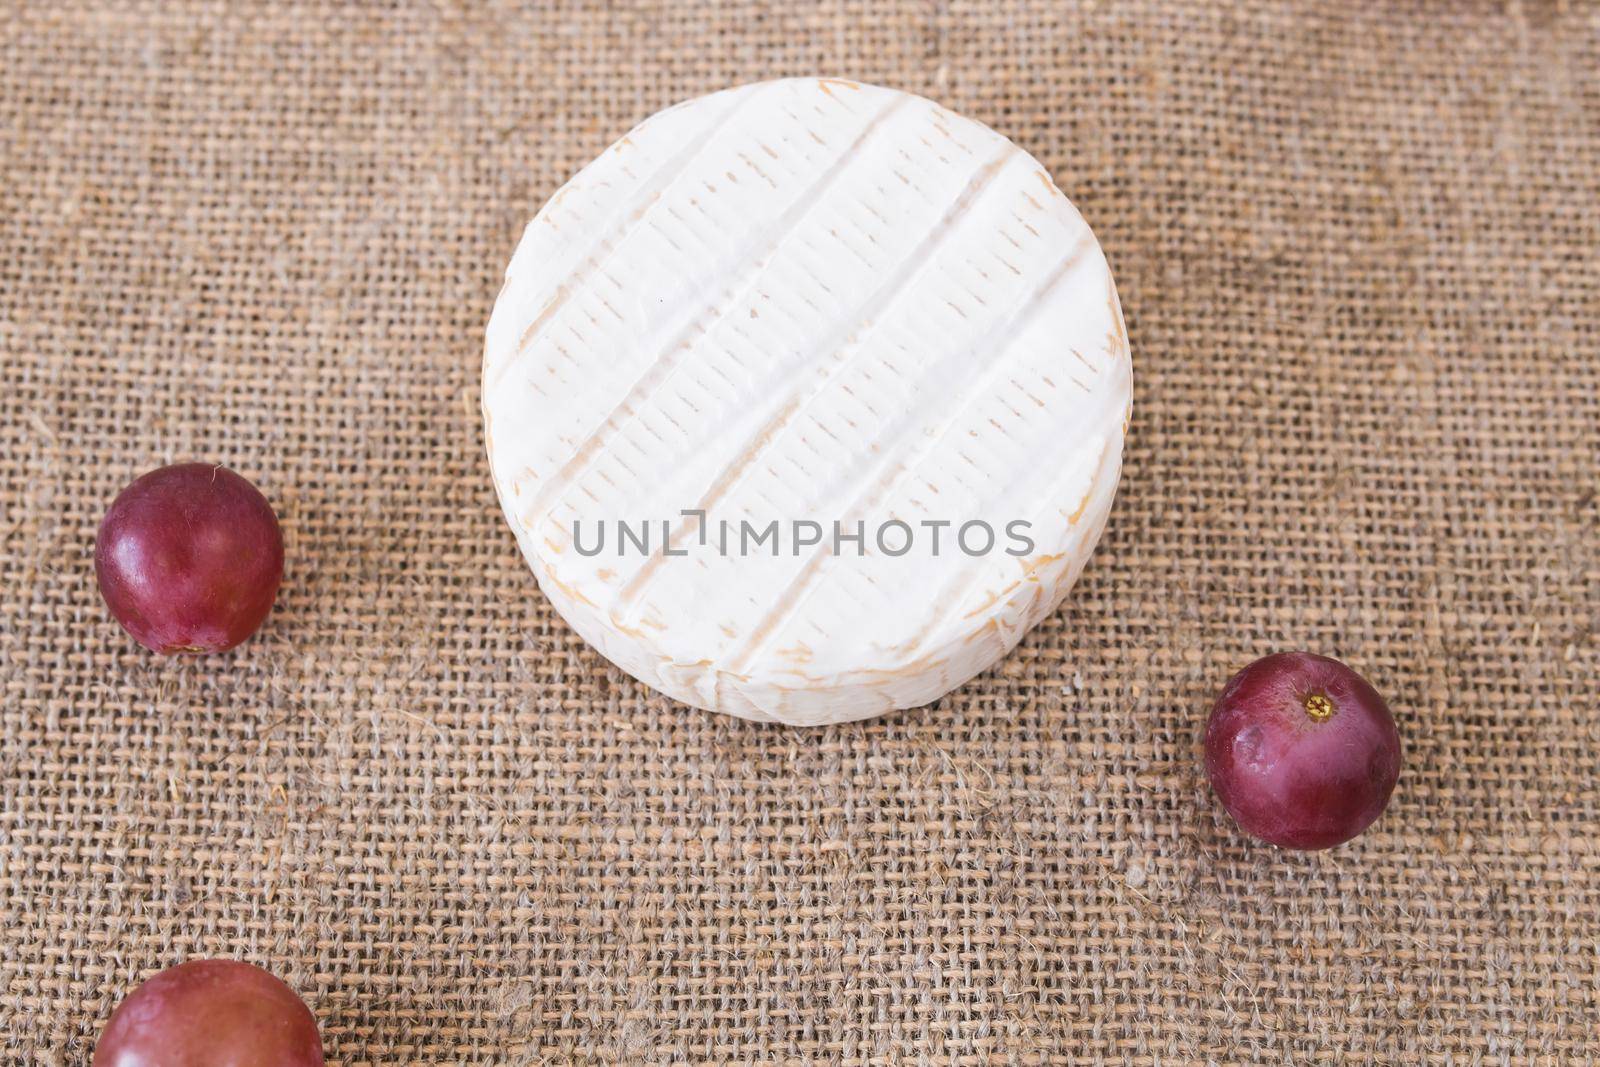 Brie or camembert cheese with grapes on rustic background.